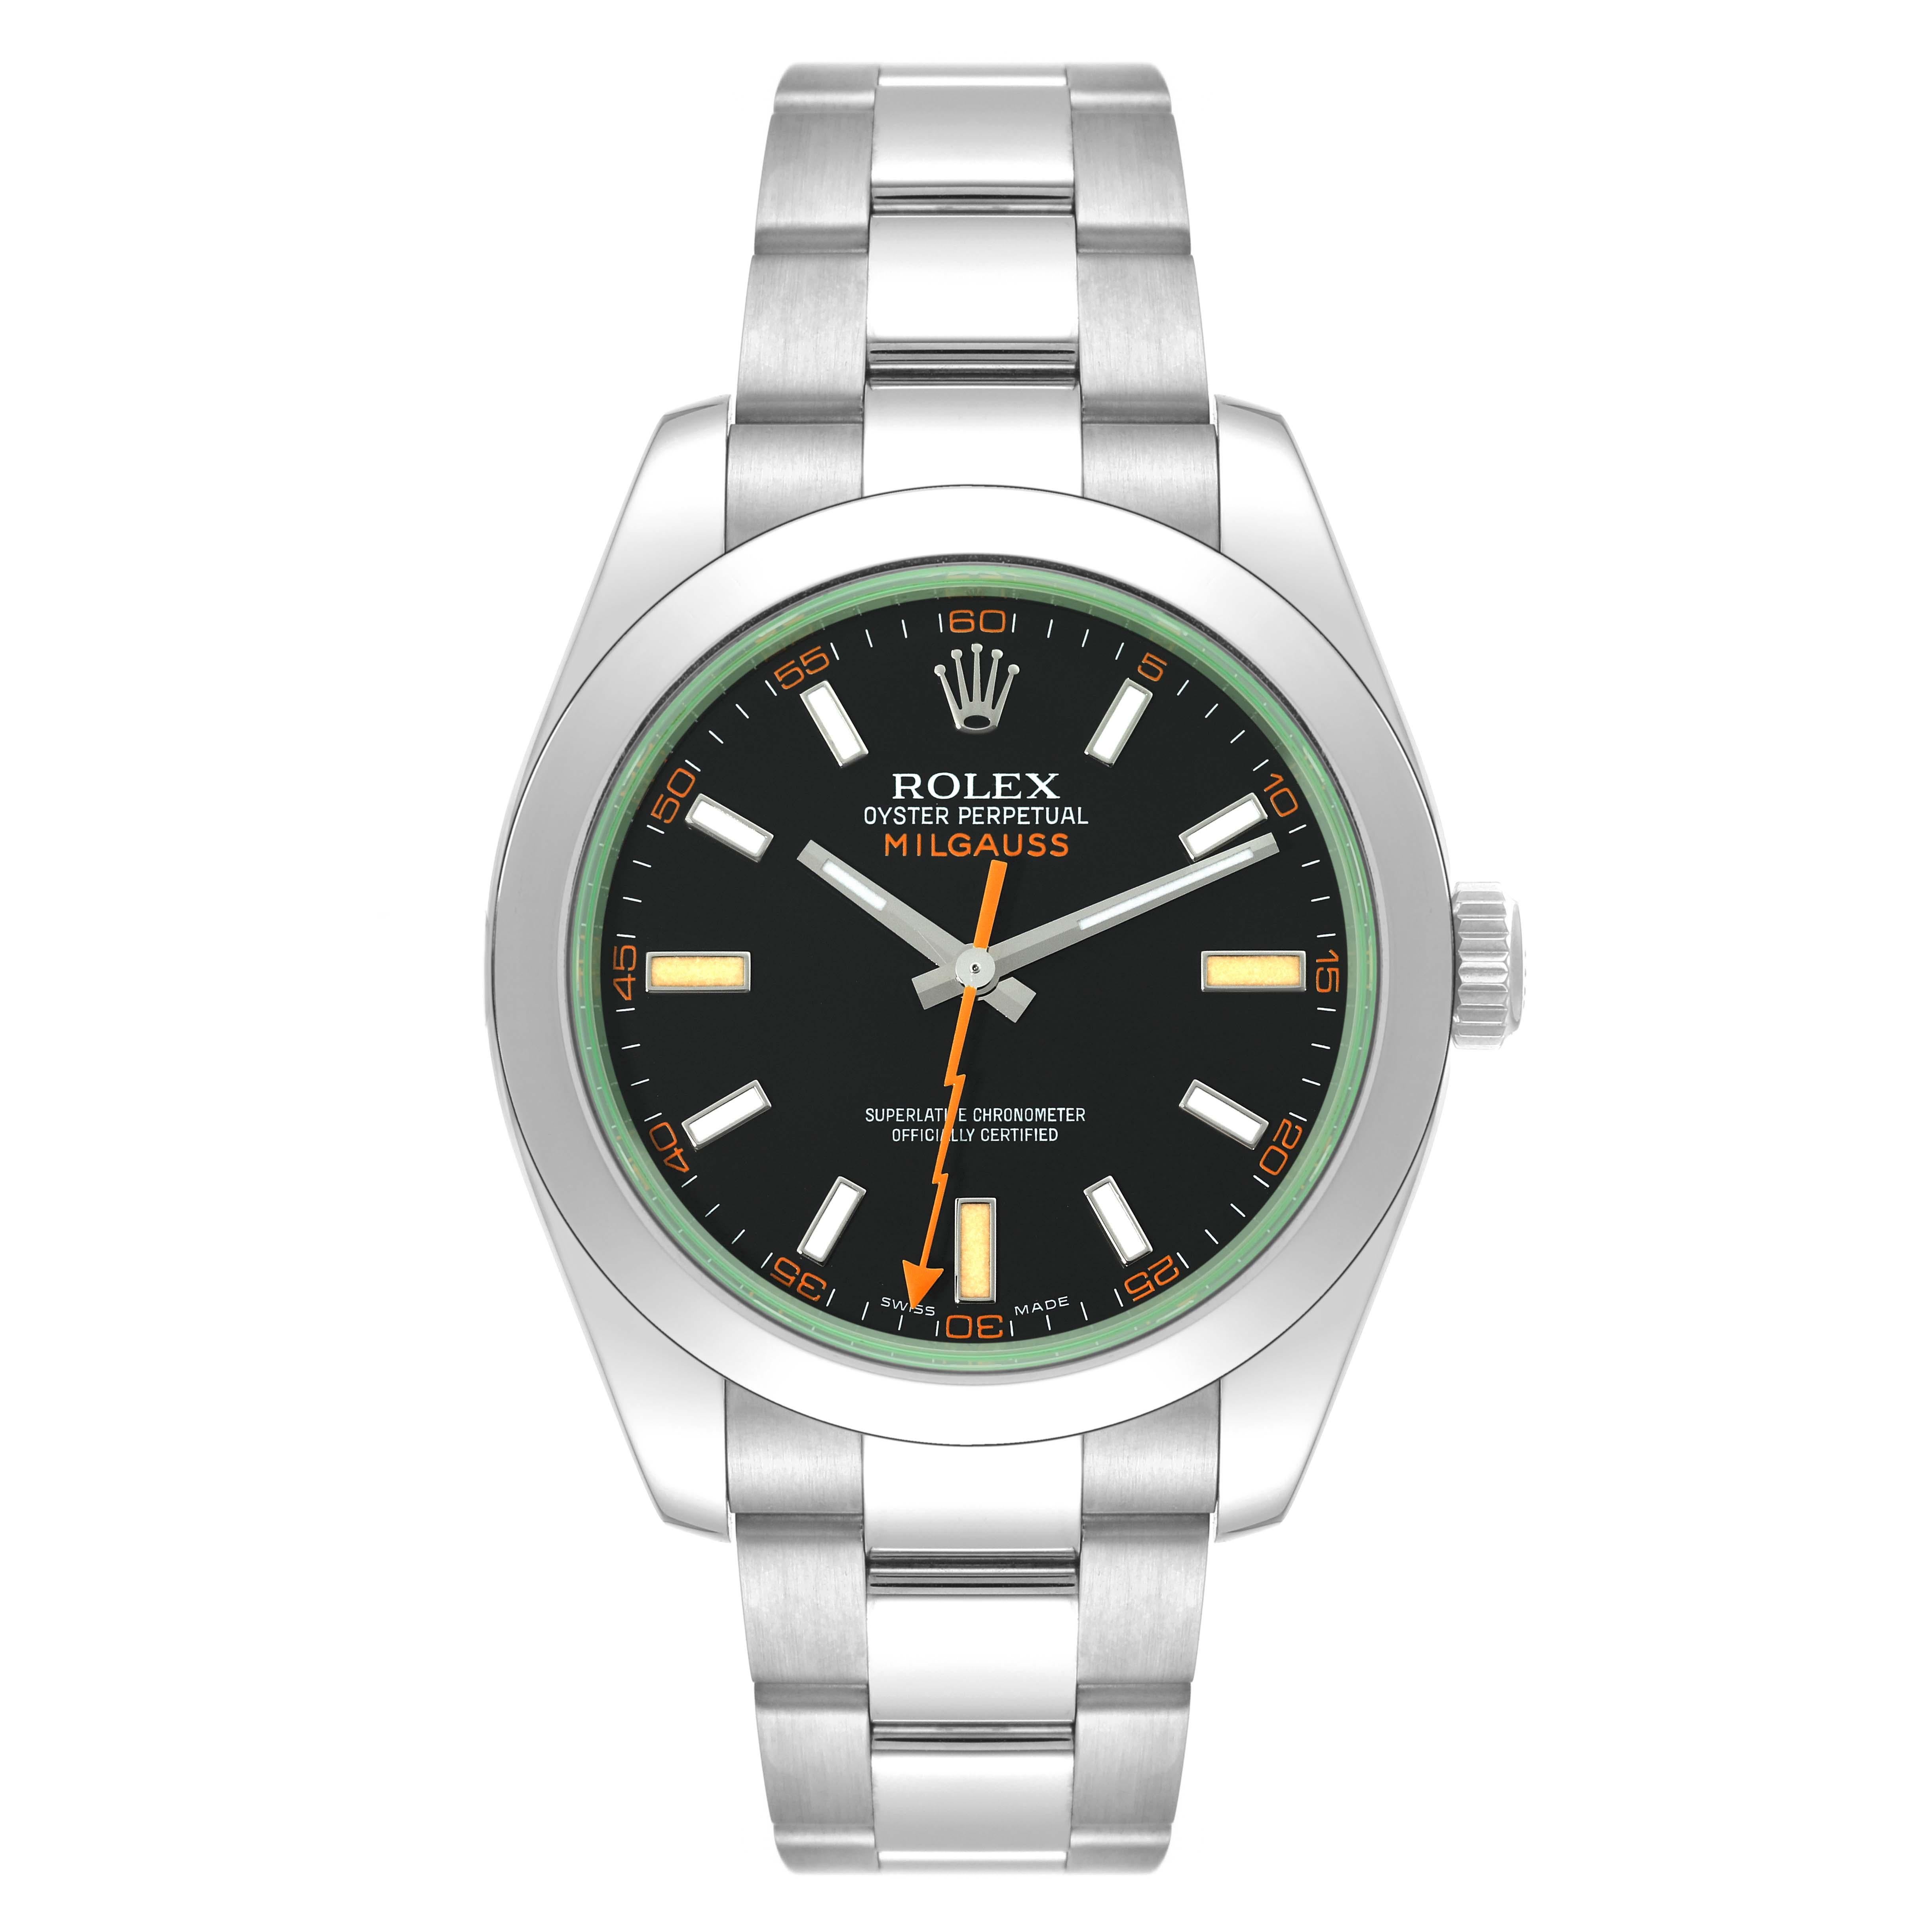 Rolex Milgauss Black Dial Green Crystal Steel Mens Watch 116400 Box Card. Officially certified chronometer automatic self-winding movement. Stainless steel case 40.0 mm in diameter. Stainless steel smooth bezel. Scratch resistant green sapphire